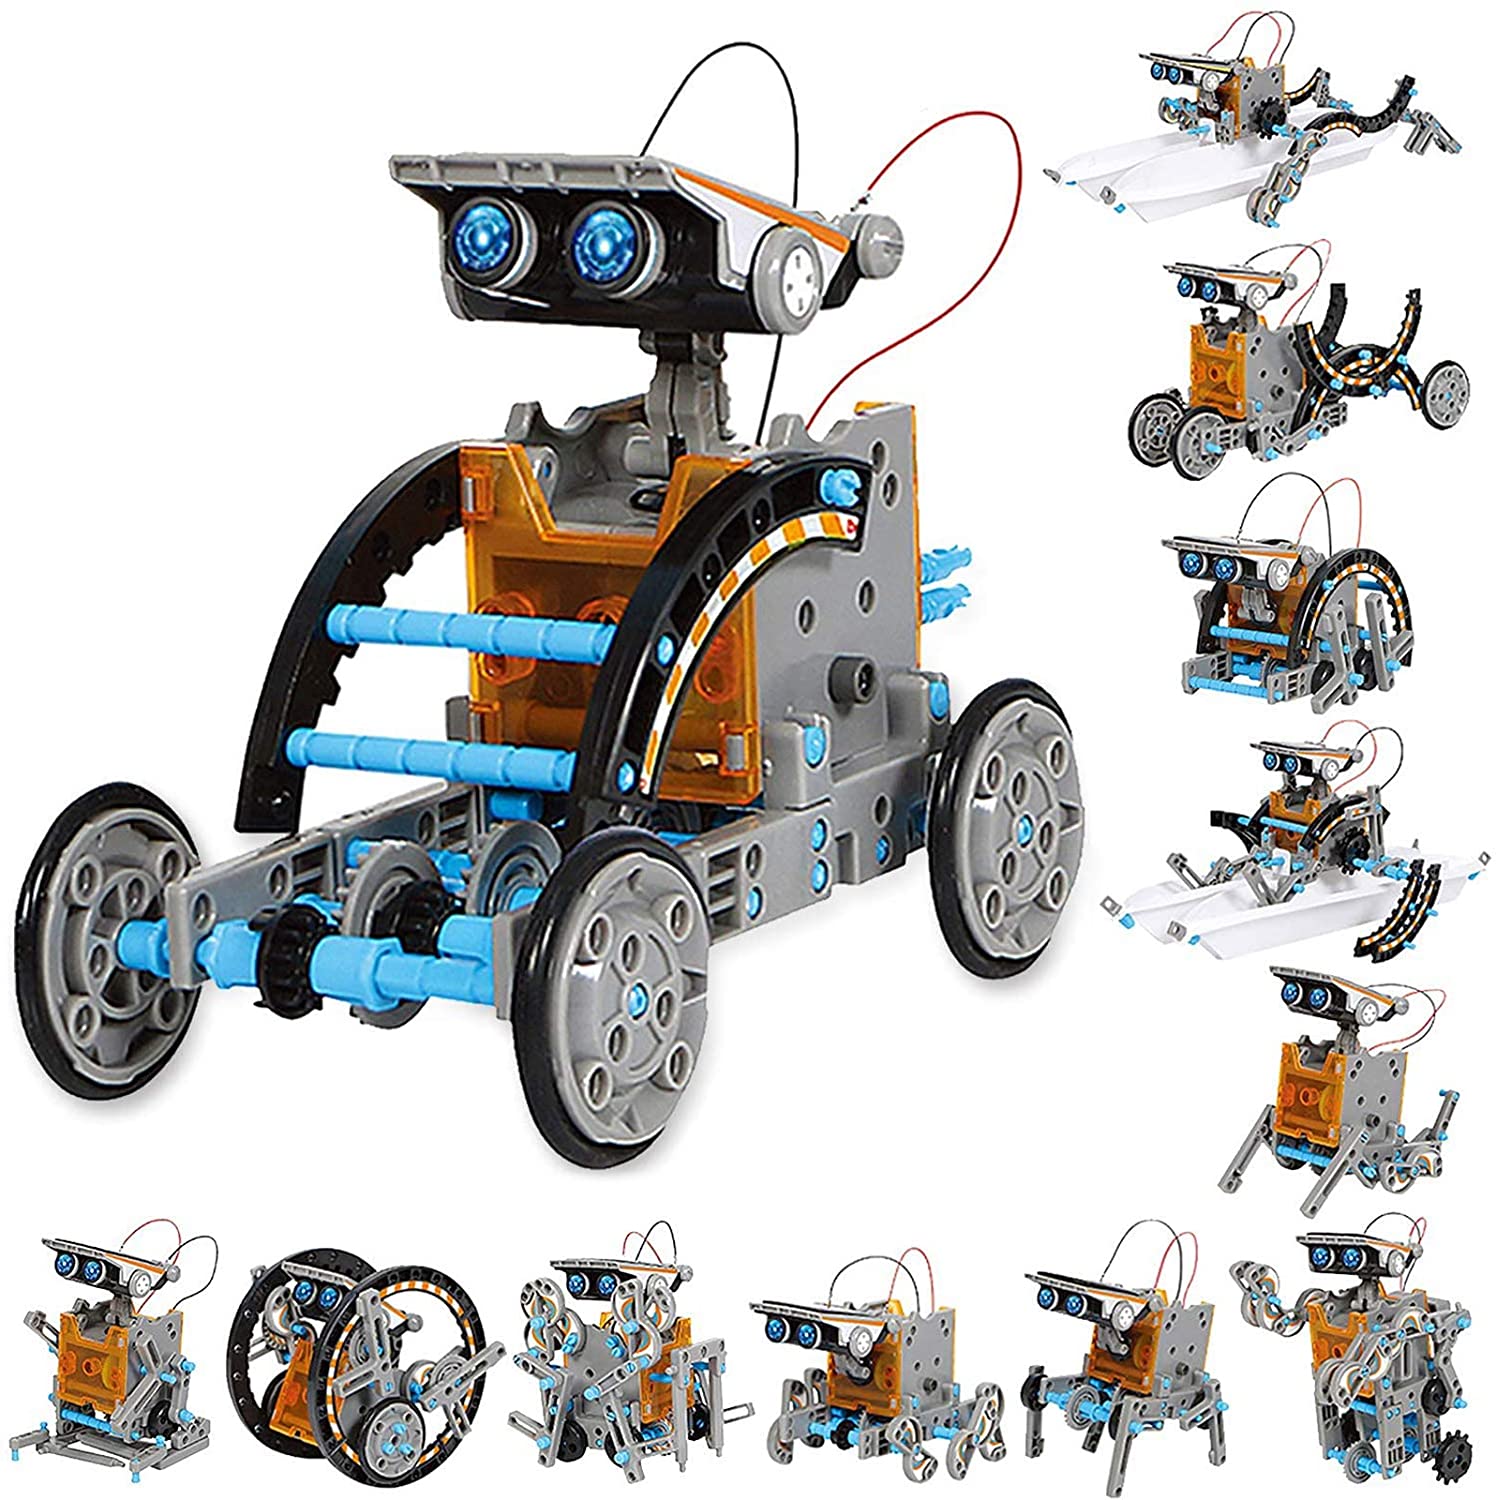 Review of Sillbird STEM 12-in-1 Education Solar Robot Toys -190 Pieces